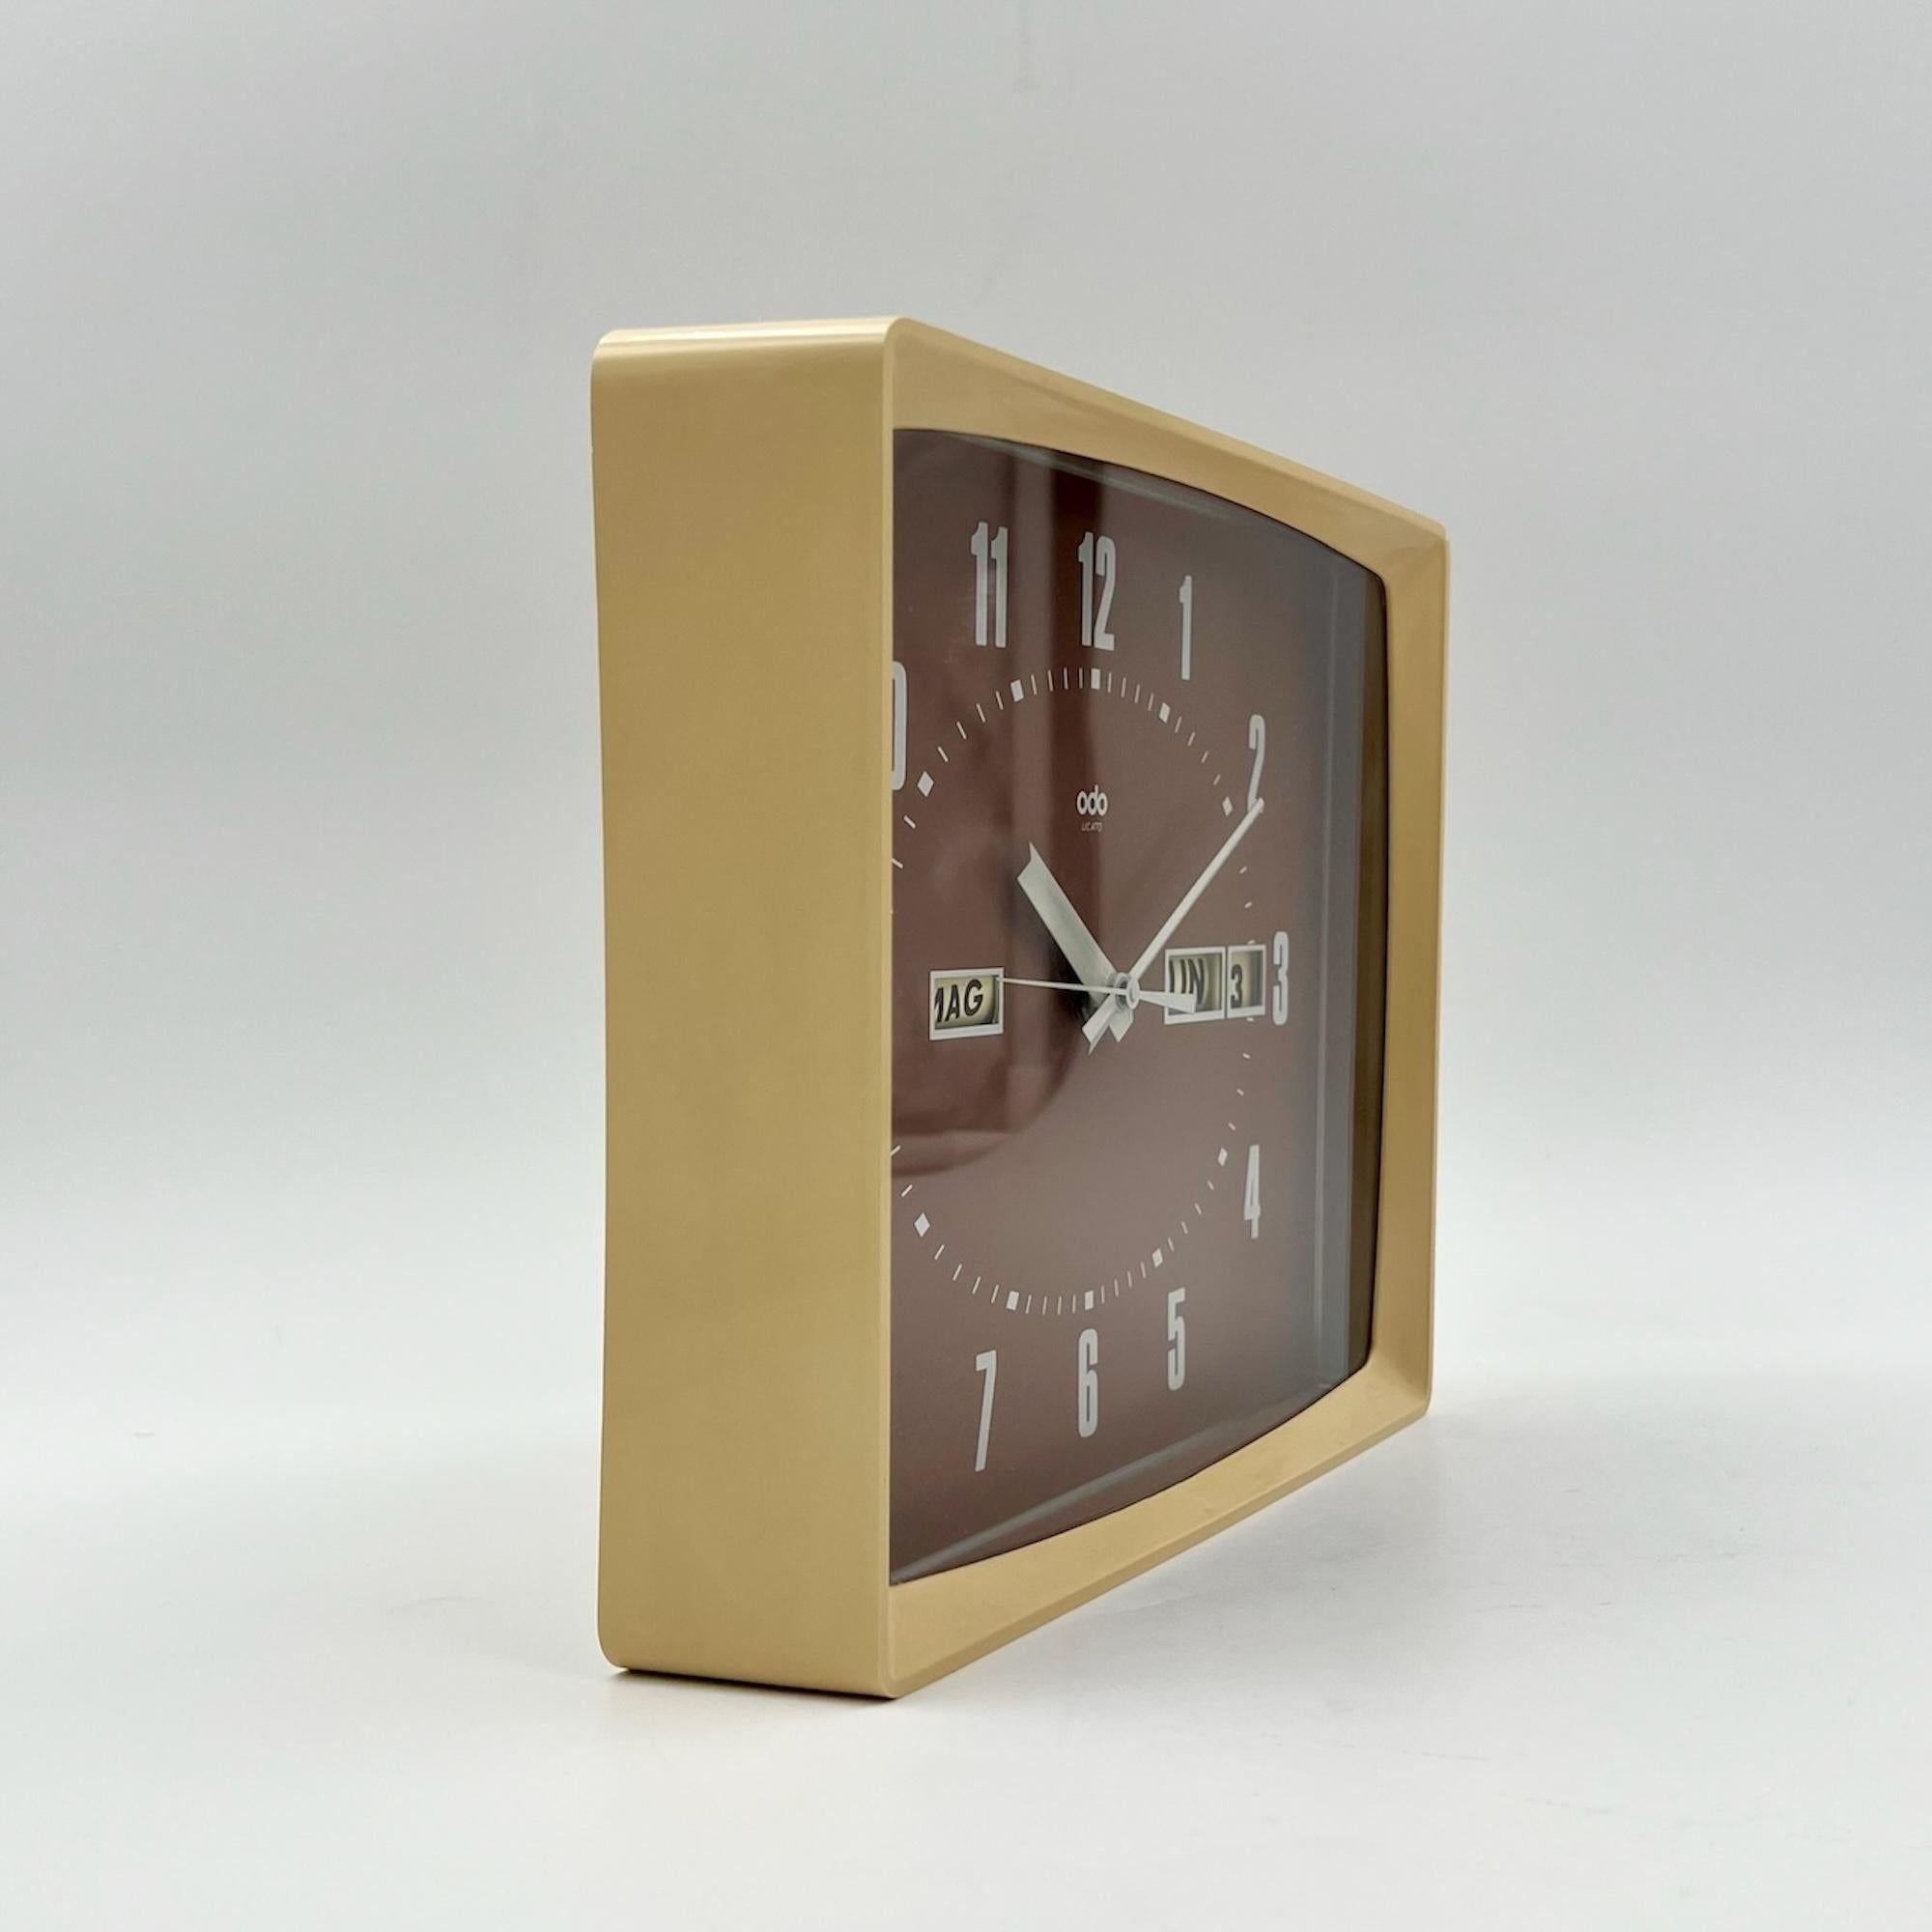 French Vintage 70’s Clock with Flip Calendar by ODO France - Space Age Charming Decor For Sale